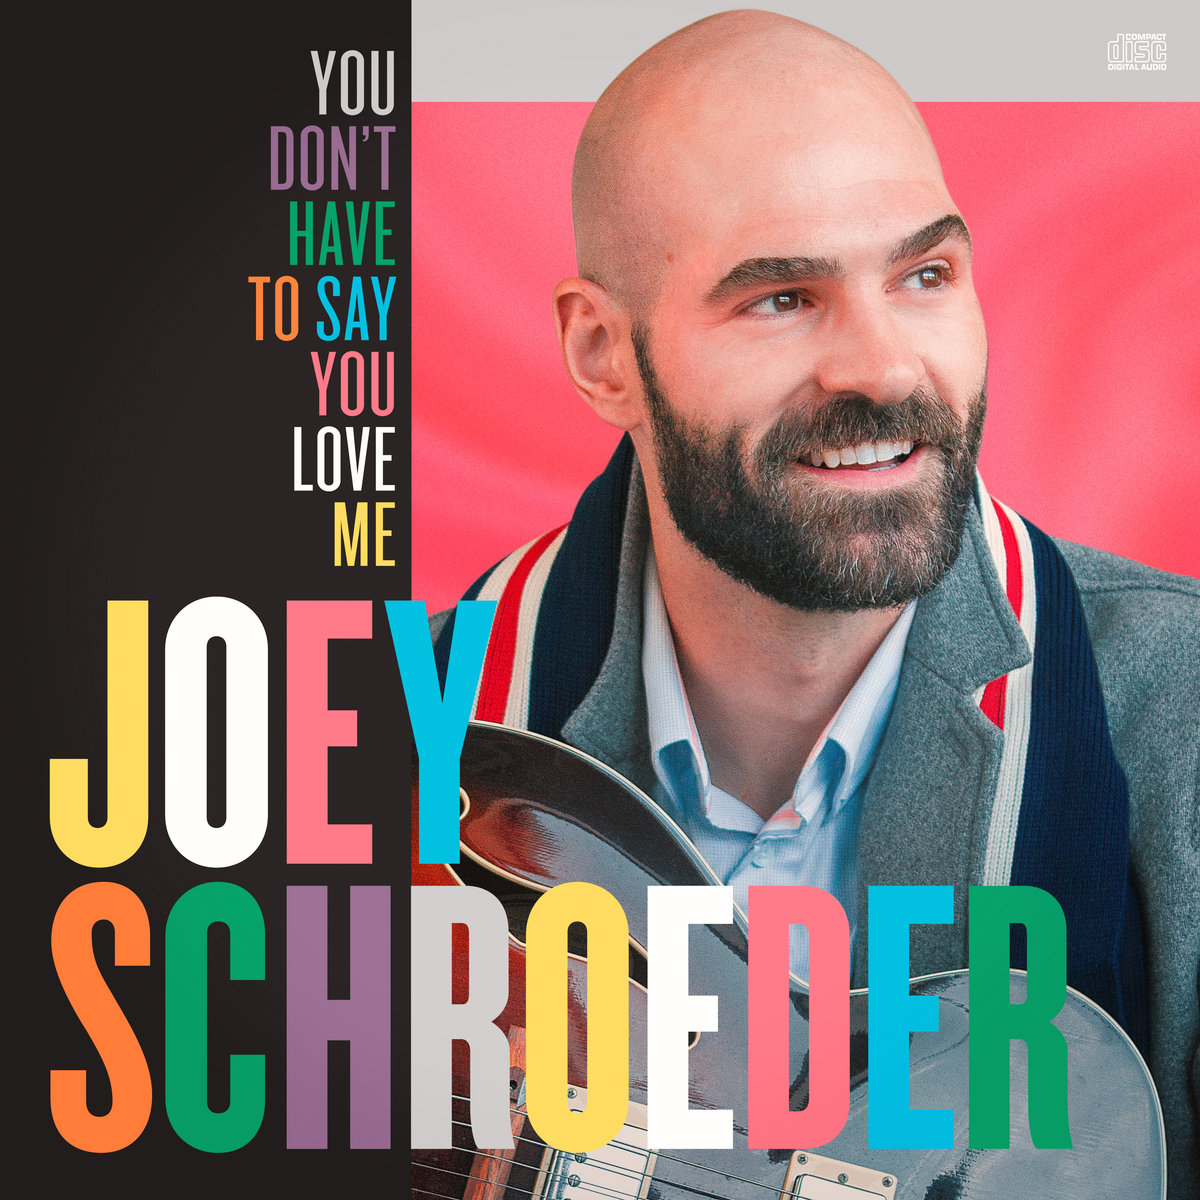 Joey Schroeder, You Dont Have To Say You Love Me